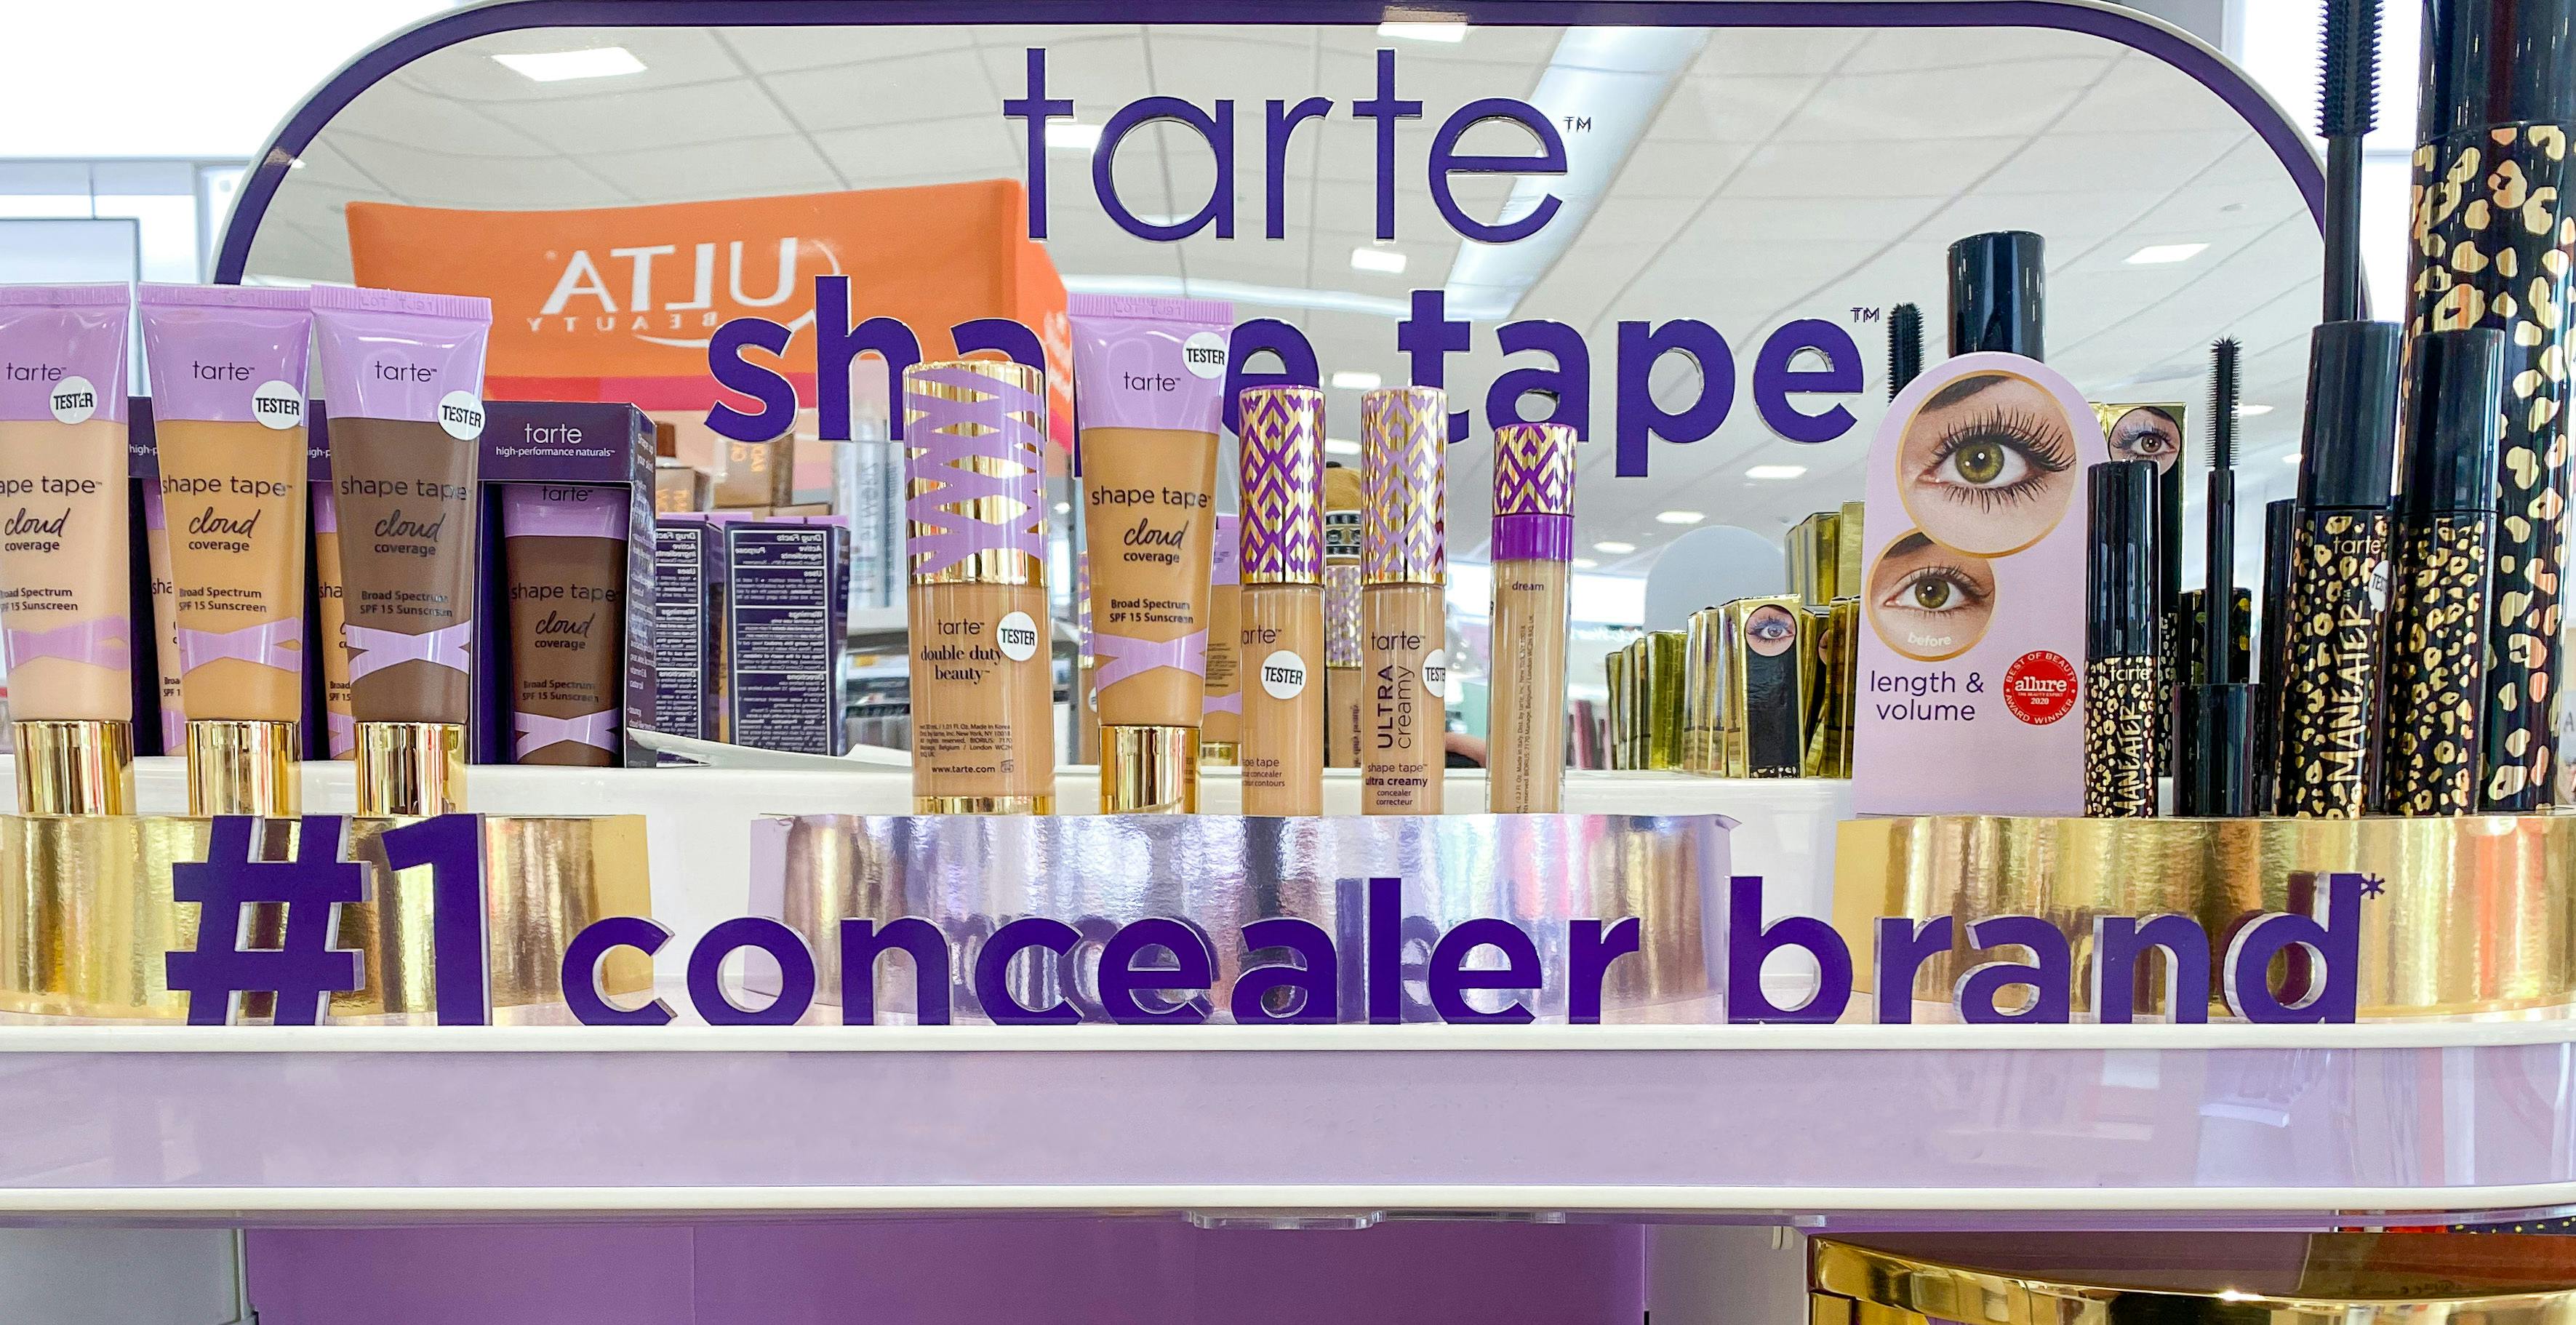 tarte, Makeup, Free With Any Order Tarte Shape Tape Cloud Coverage Spf 5  Sample Card